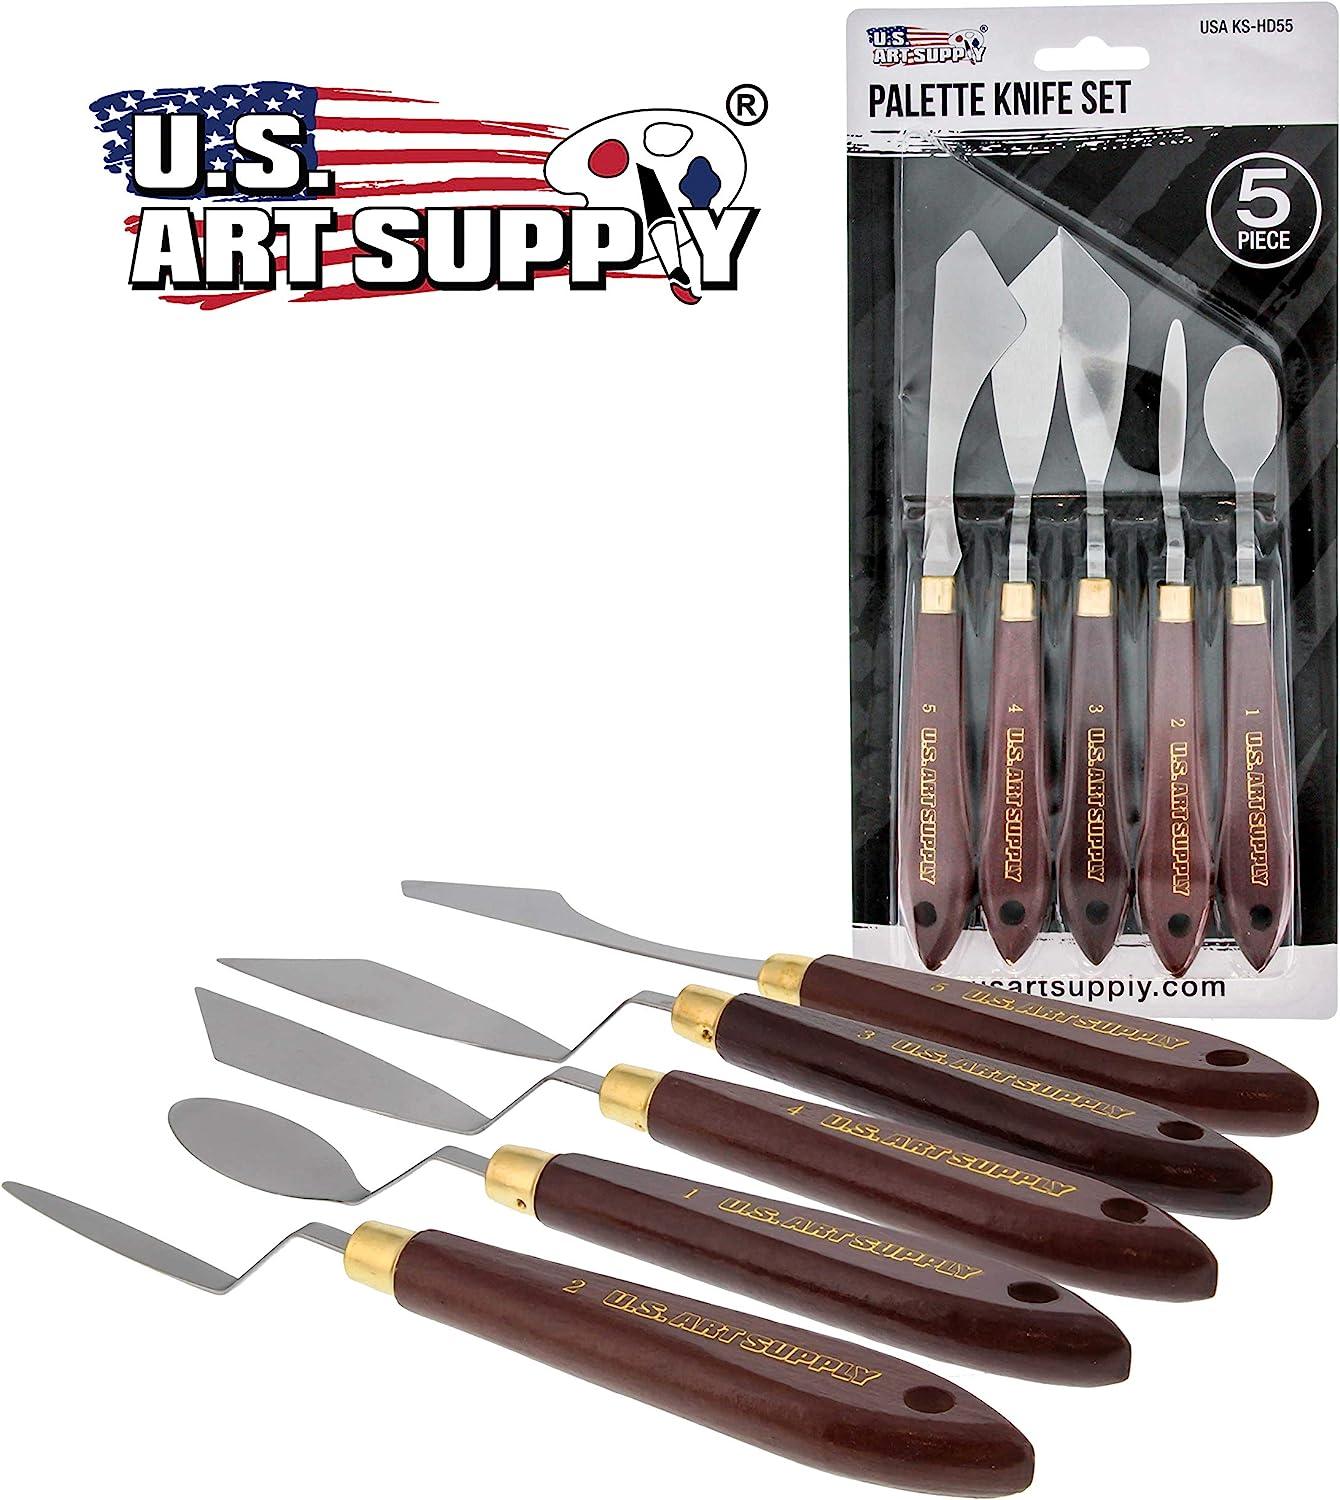 U.S. Art Supply 5-Piece Artist Stainless Steel Palette Knife Set - Wood  Hande Flexible Spatula Painting Knives for Color Mixing Spreading, Applying  Oil, Acrylic, Epoxy, Pouring Paint on Canvases, Cake